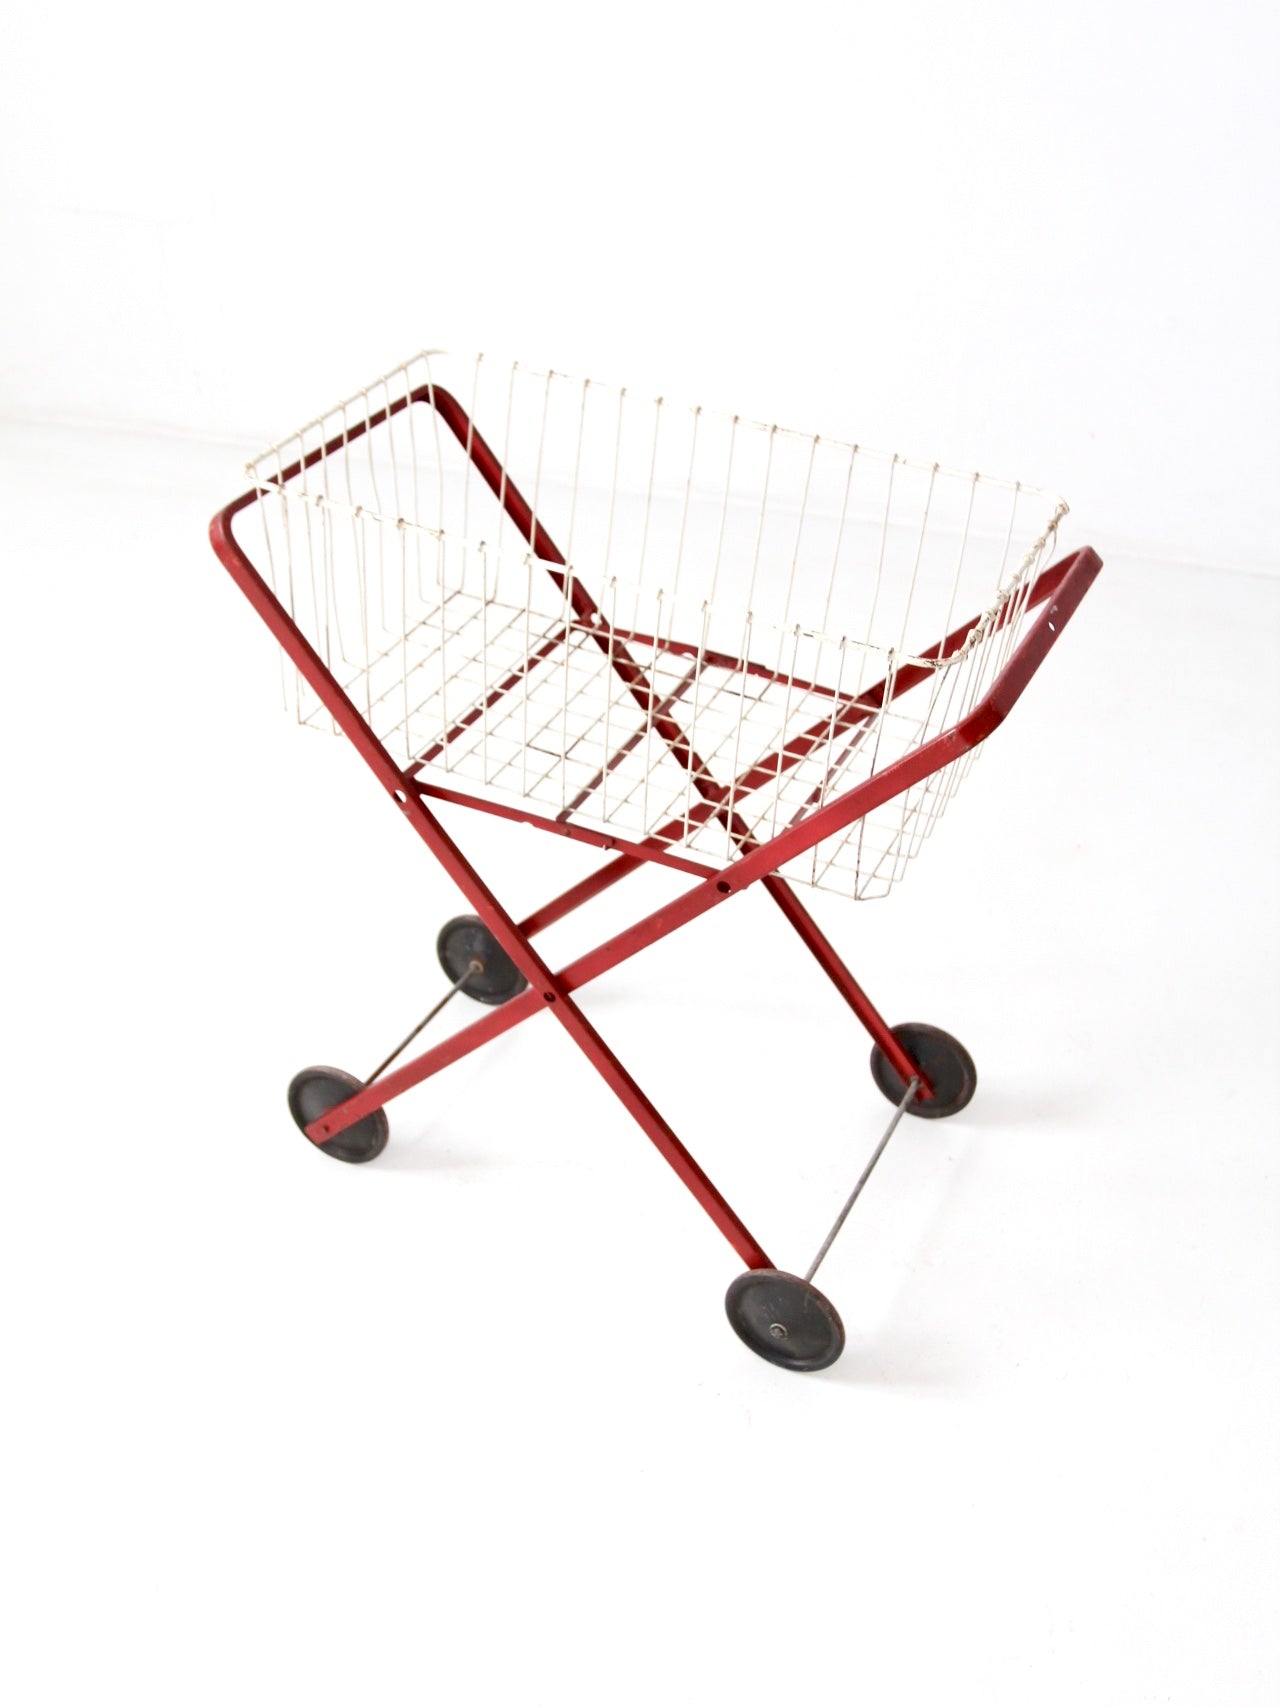 vintage rolling laundry cart